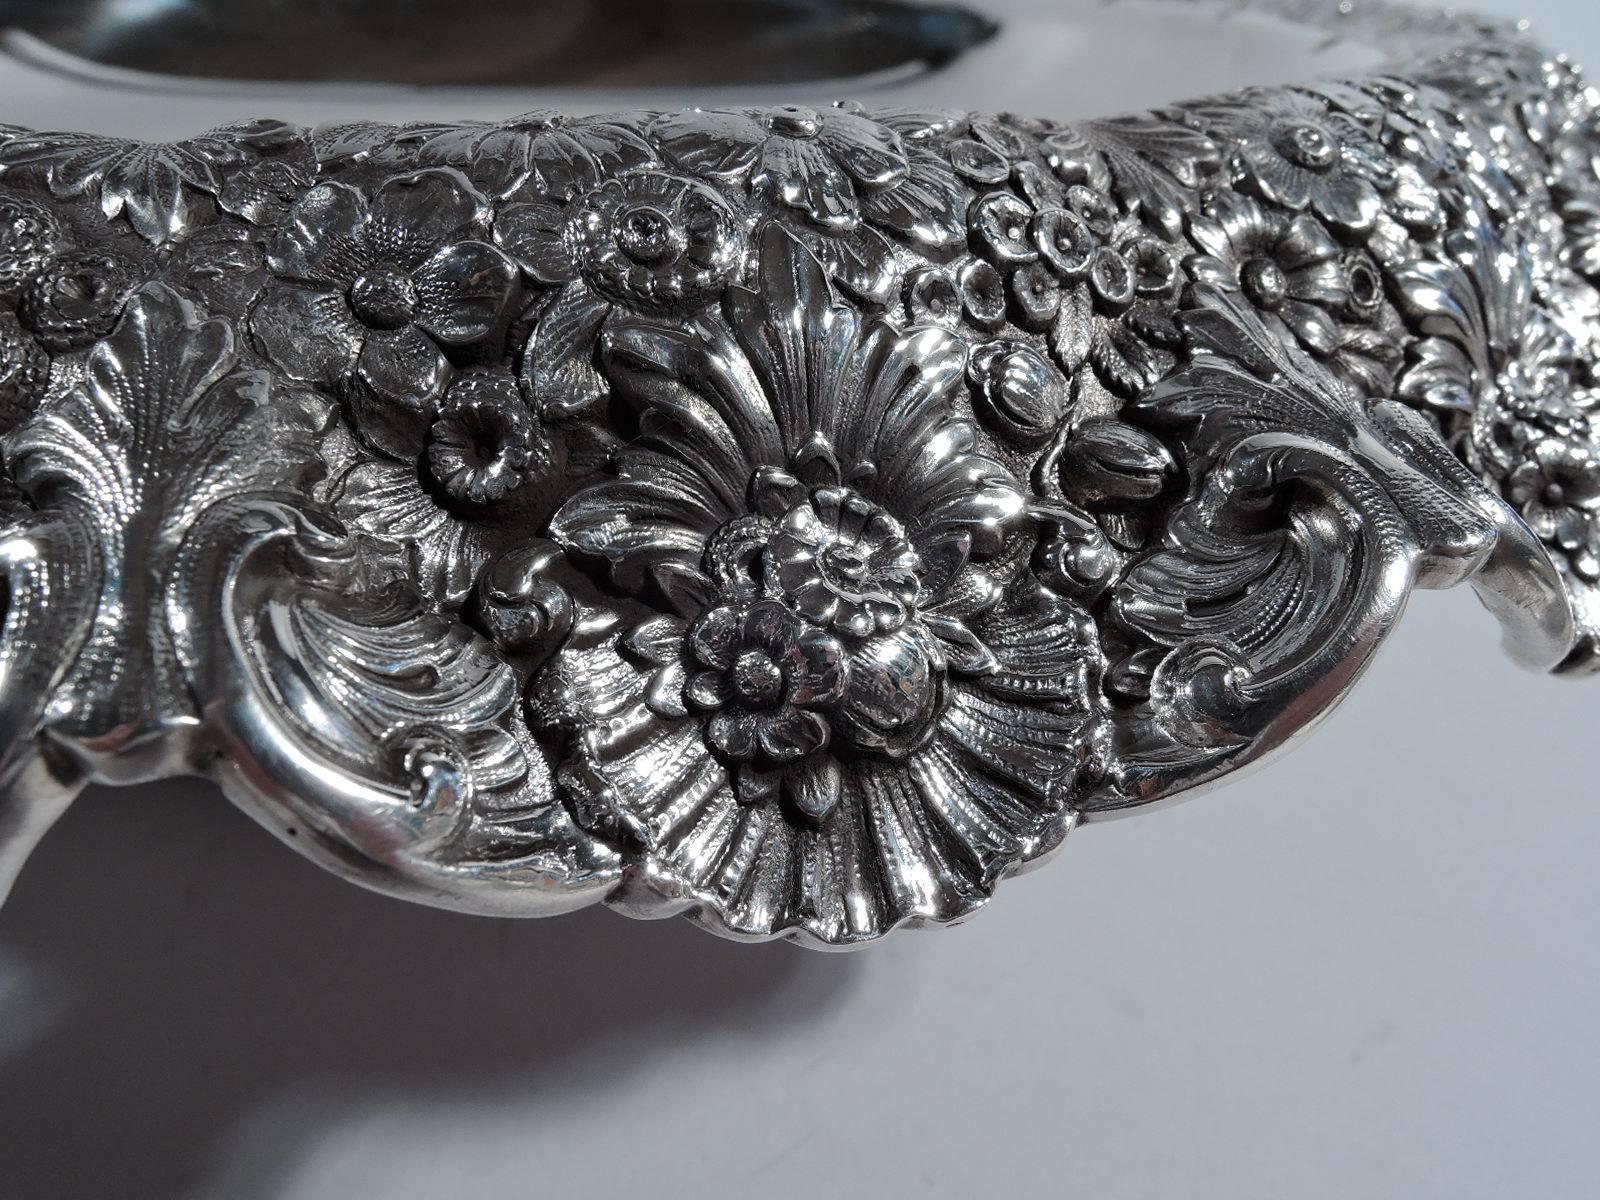 American Rare Antique Tiffany Centrepiece Bowl with Wonderful Wild Flowers